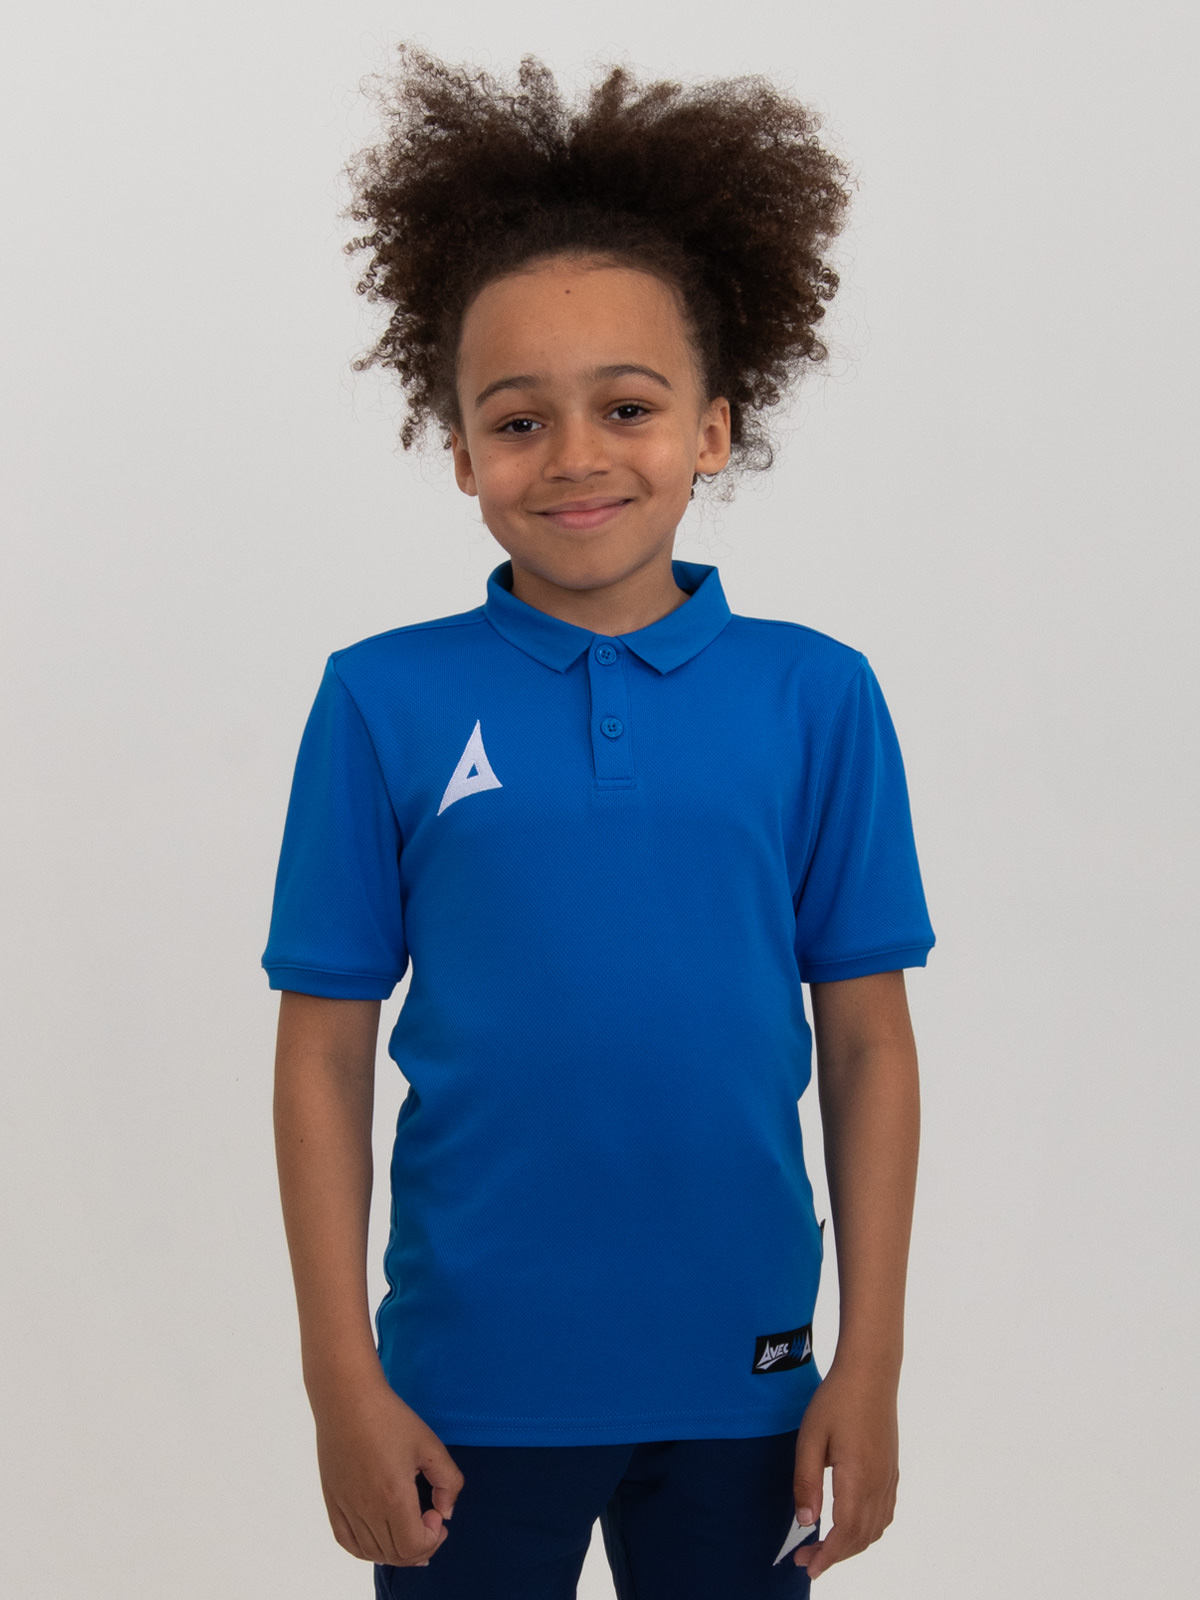 a child is smiling while wearing a plain royal blue sports polo